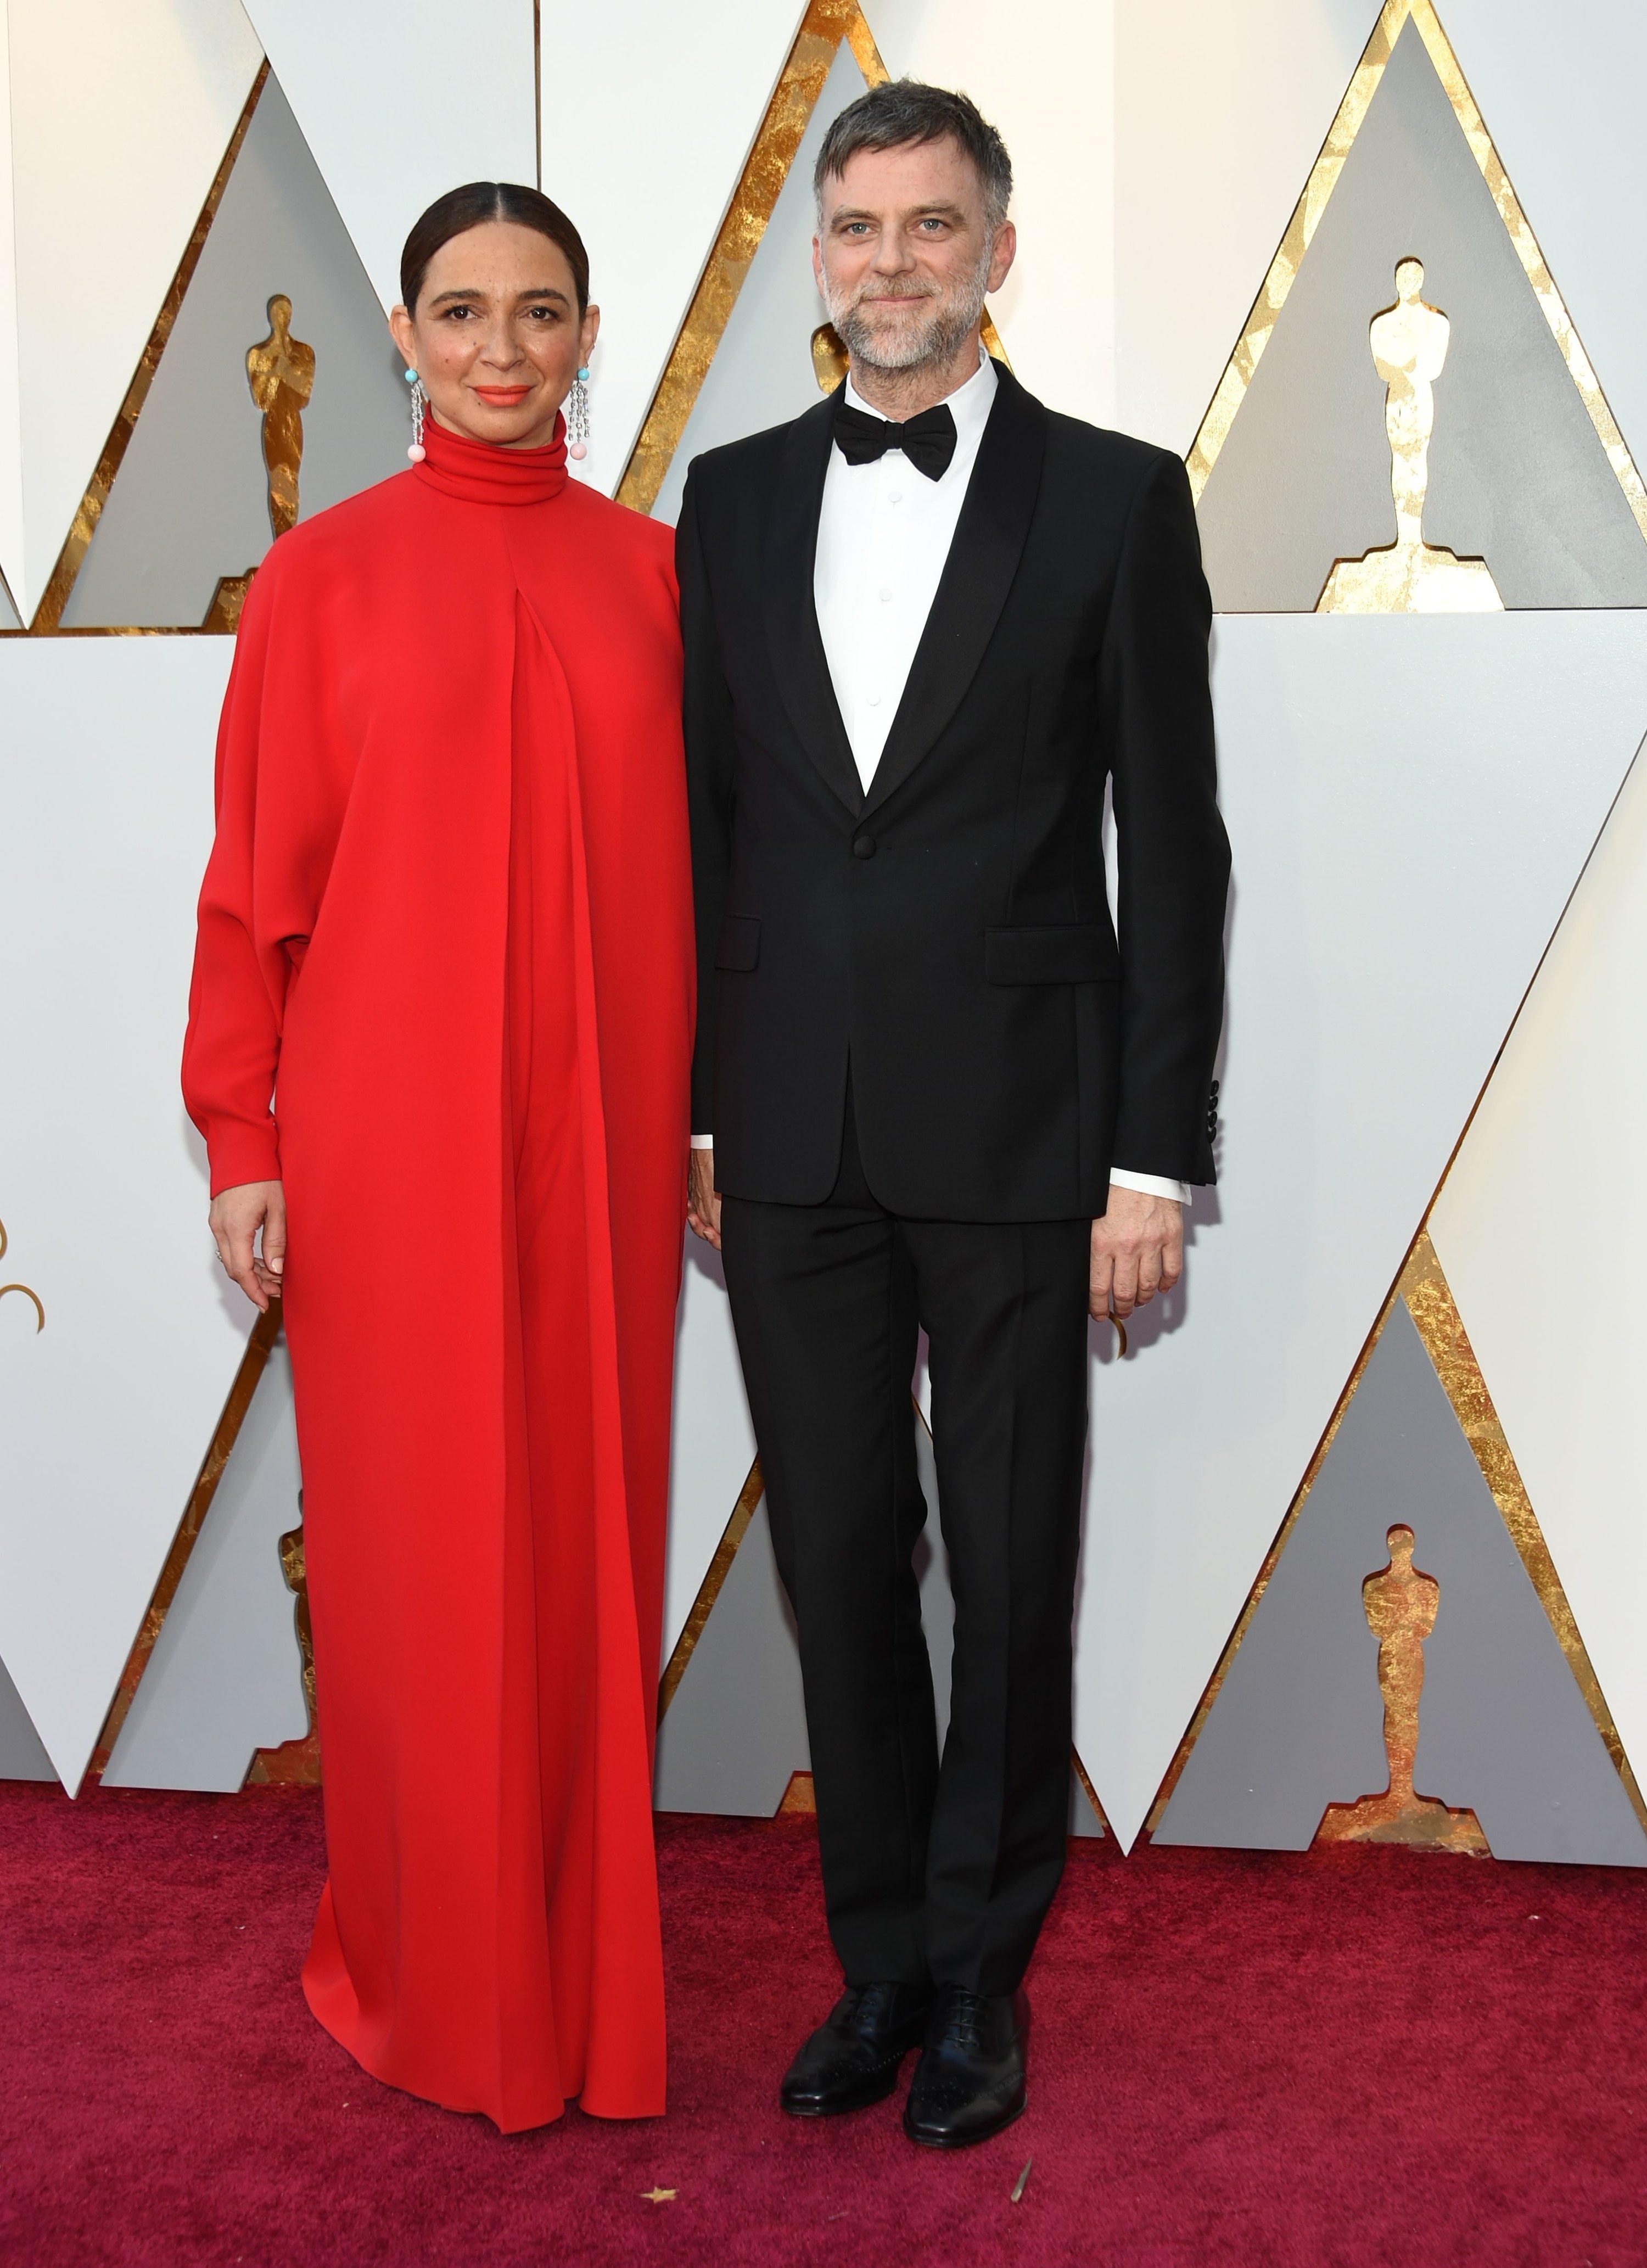 the couple at the oscars